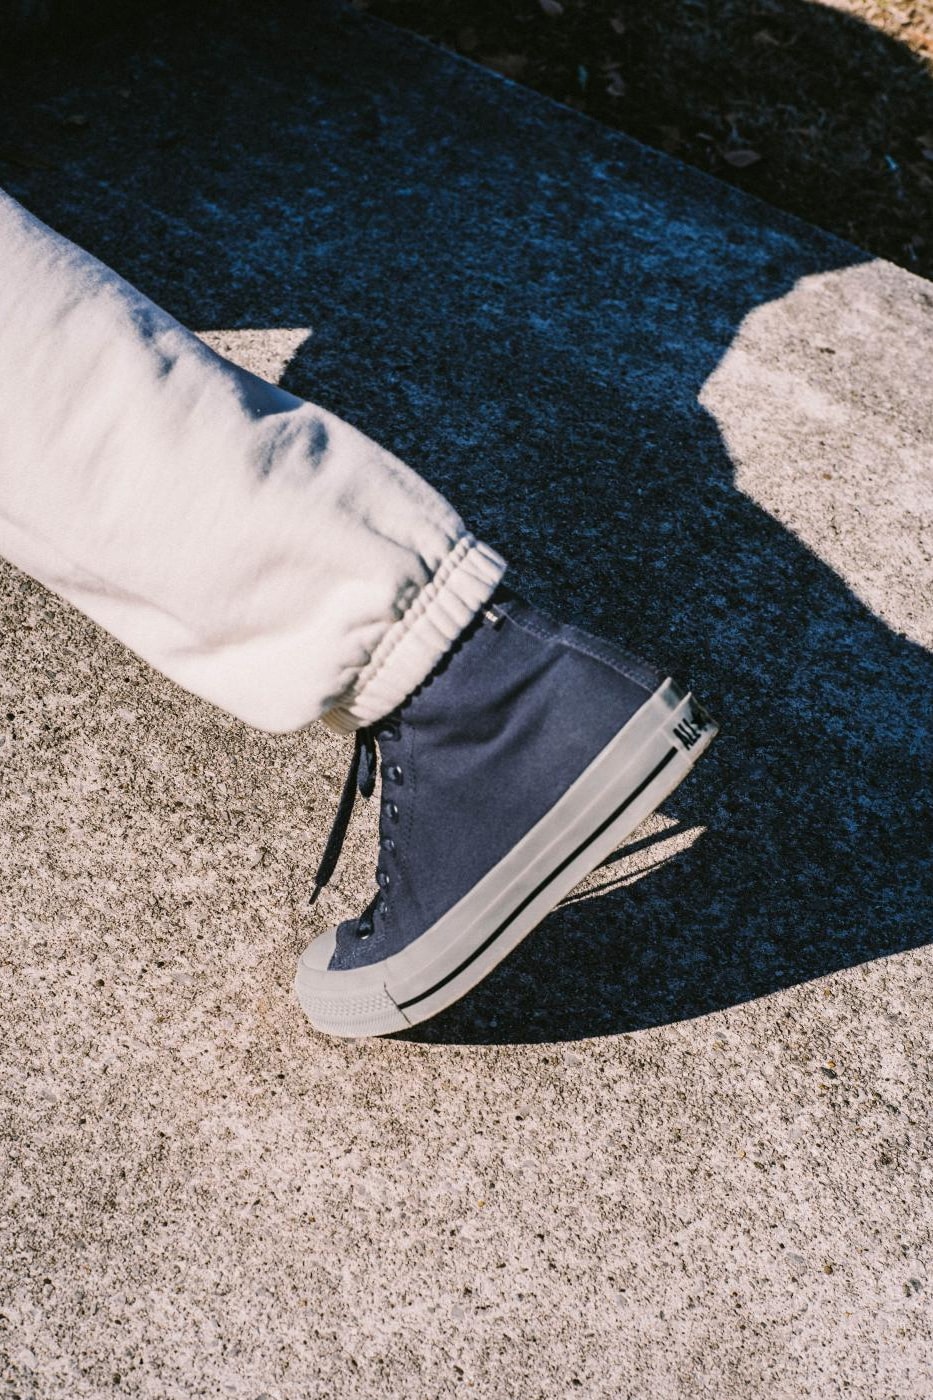 nanamica converse all star gore tex 115 birthday 2023 spring summer collection collaboration  release info date price dark navy gray 